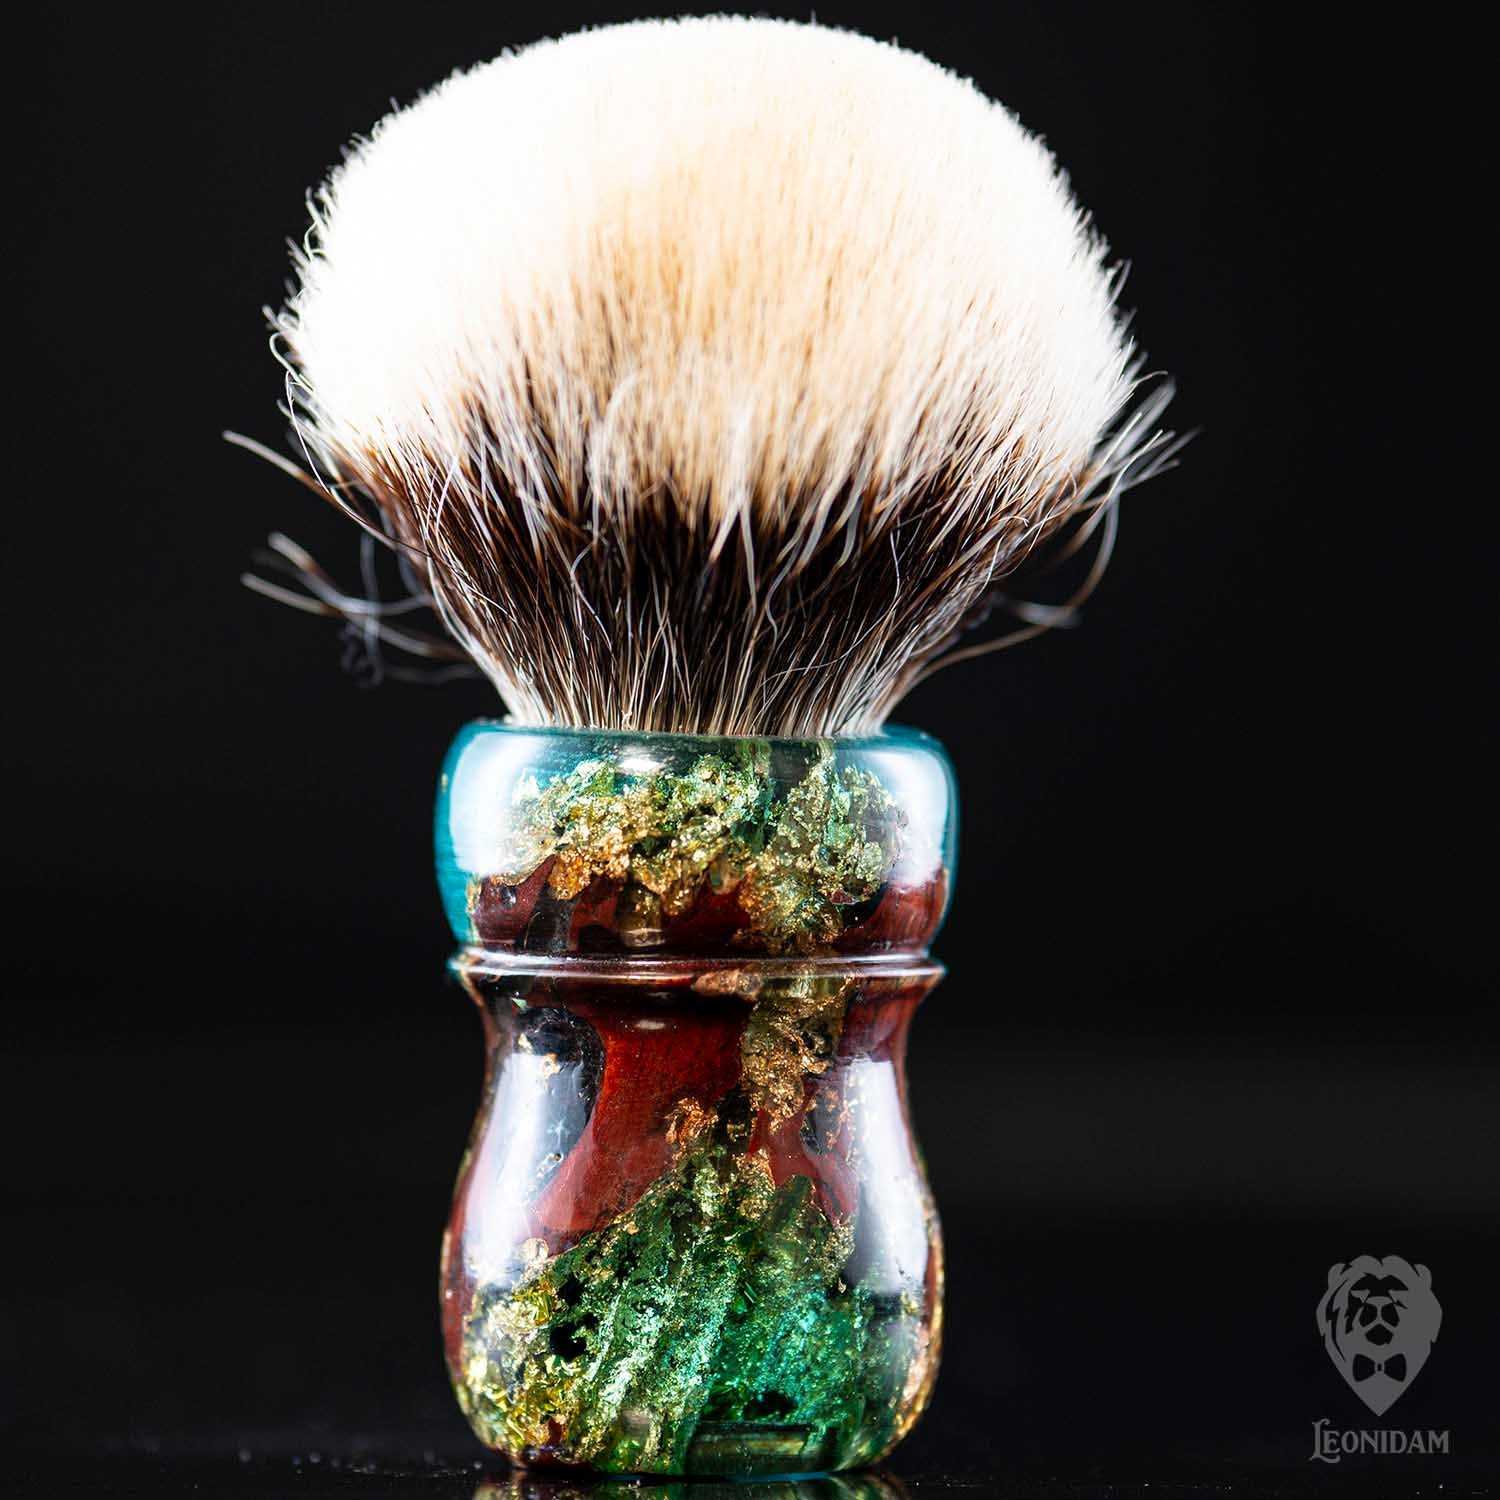 Handmade Shaving Brush "Doge" in stabilized mooring post wood covered with gold and blue resin